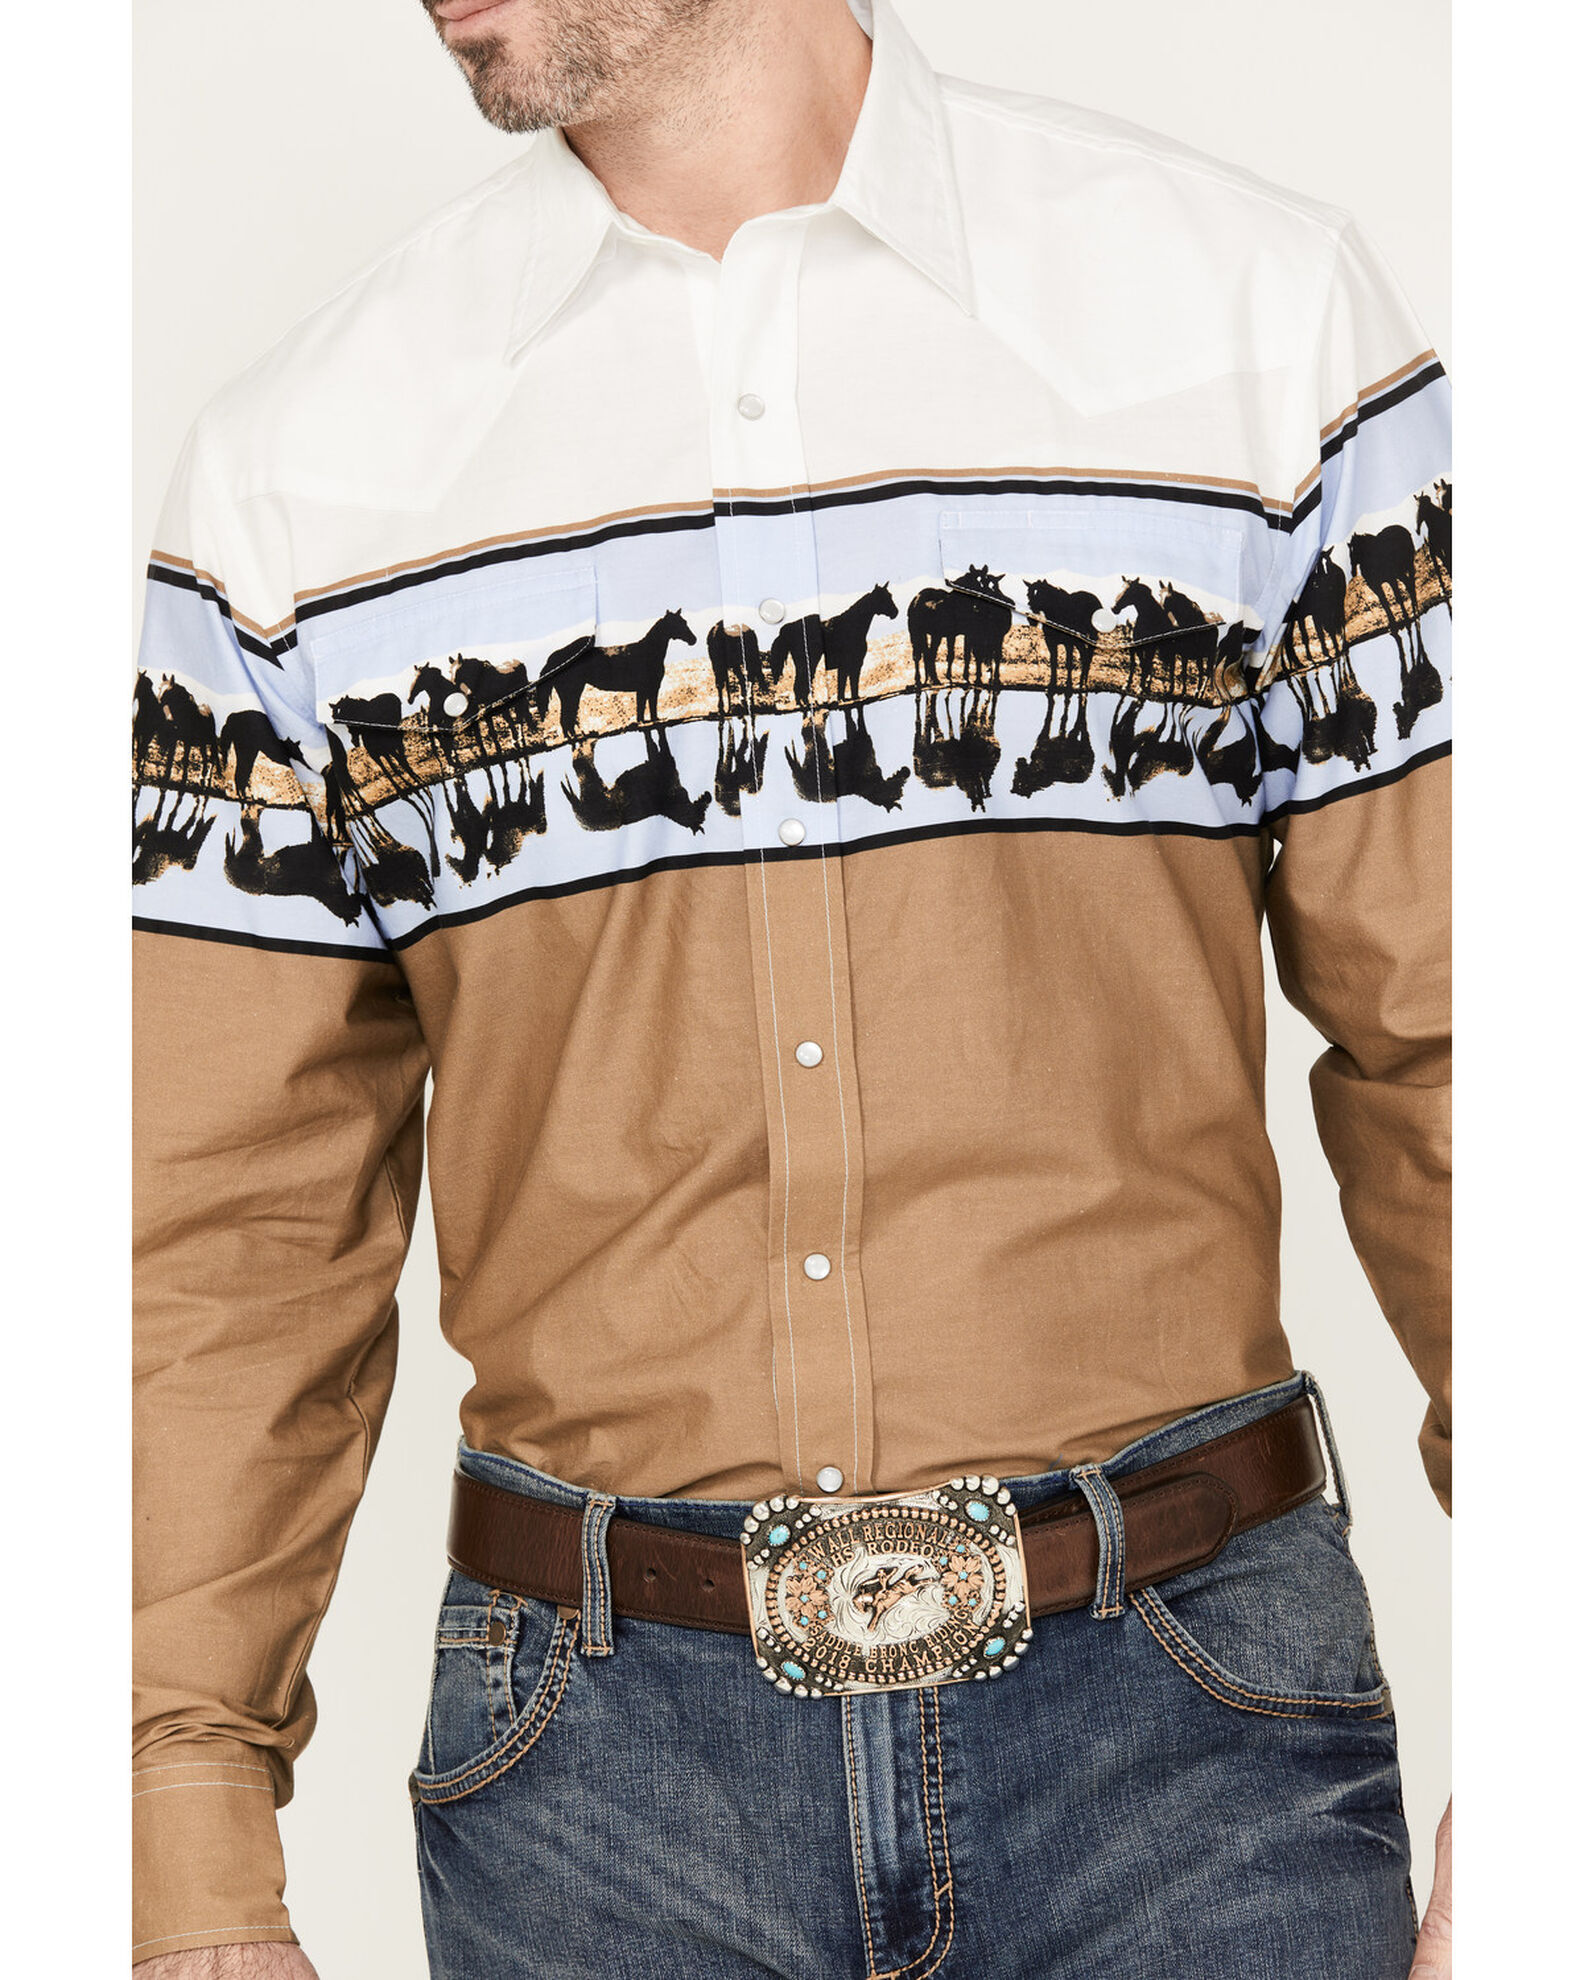 Roughstock Tapestry Pearl Snap - Diamond T Outfitters